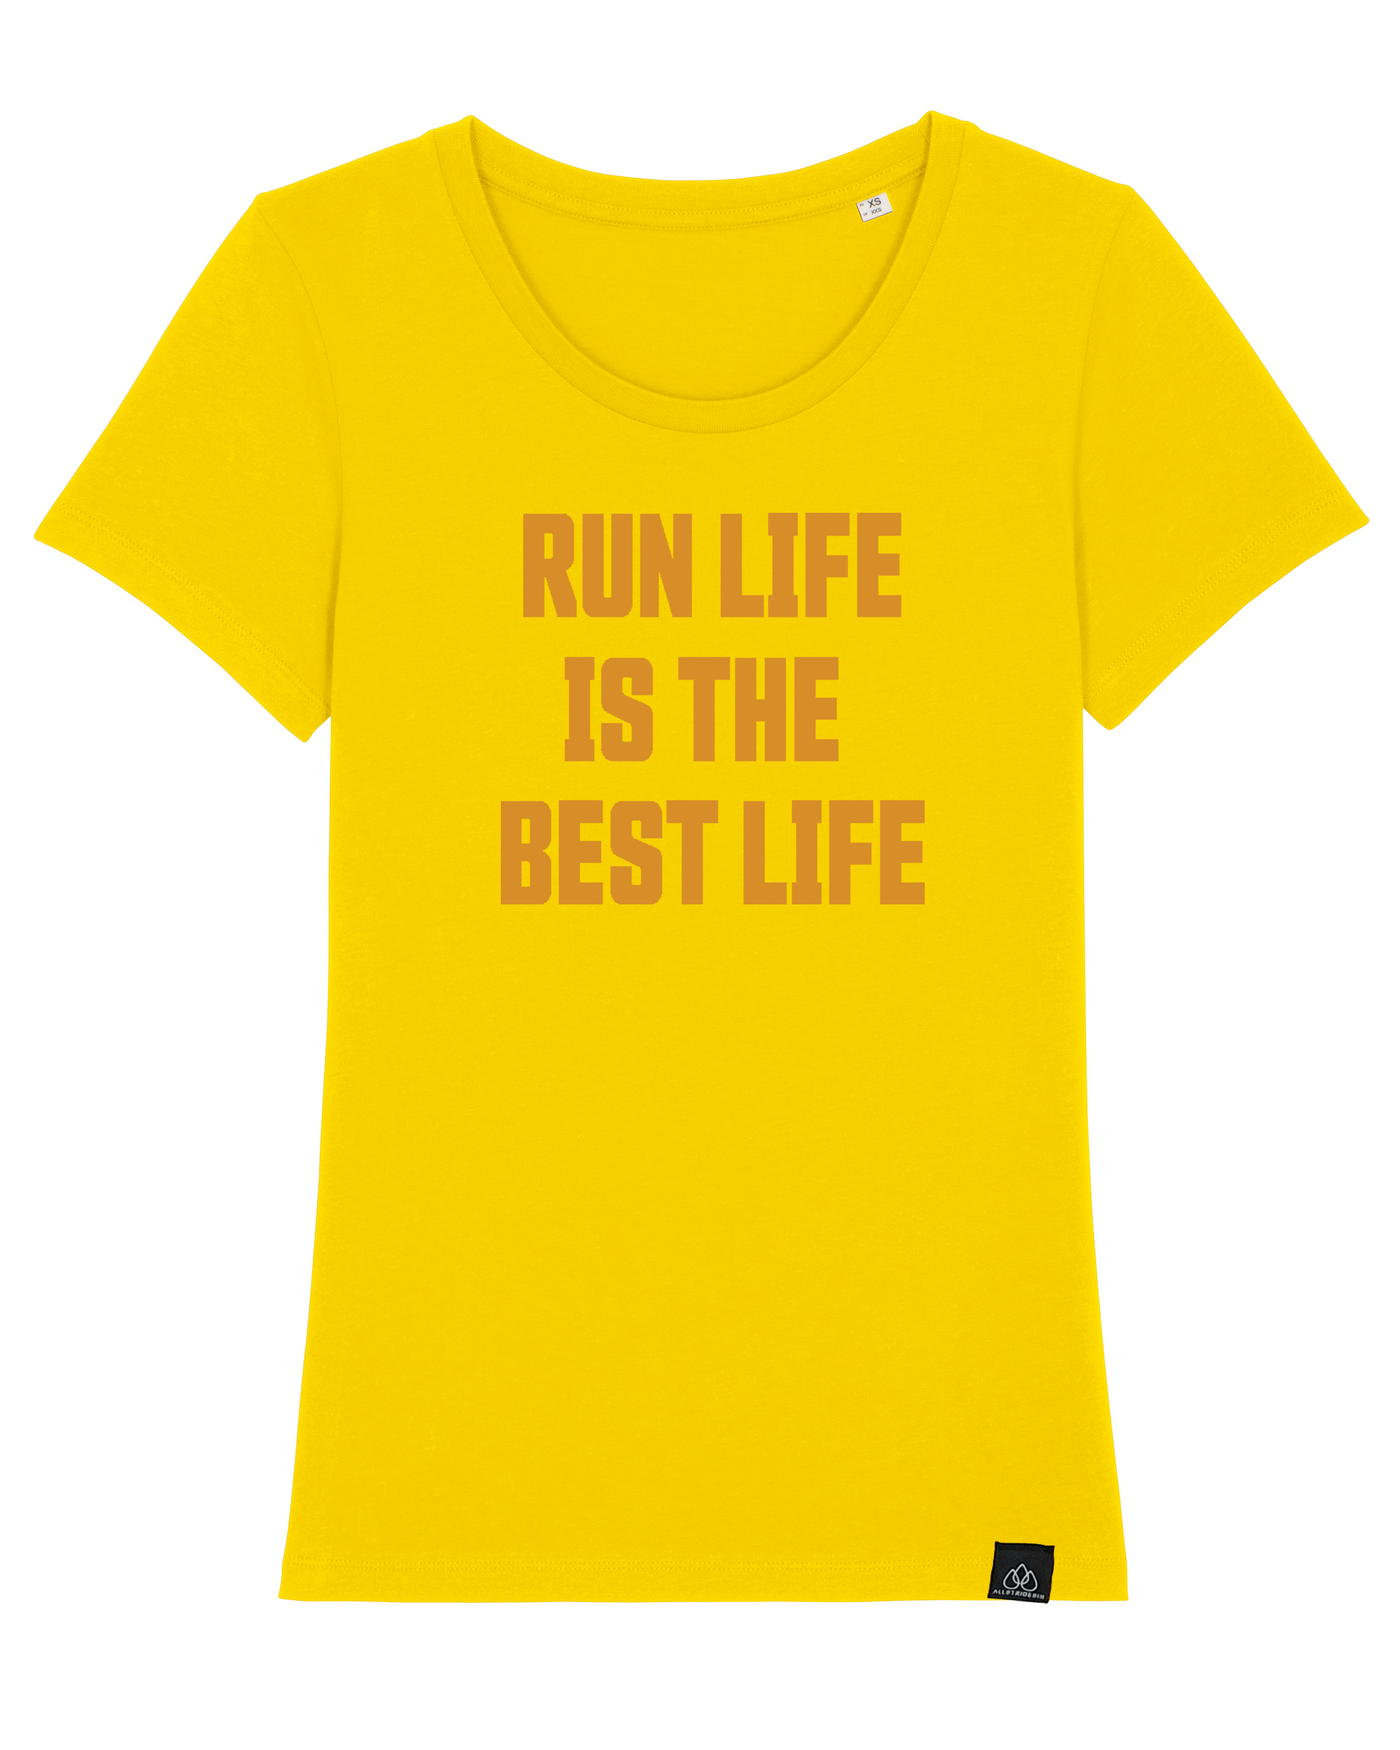 RUN LIFE IS THE BEST LIFE - ICONIC LADY T-SHIRT | ALLSTRIDESIN®